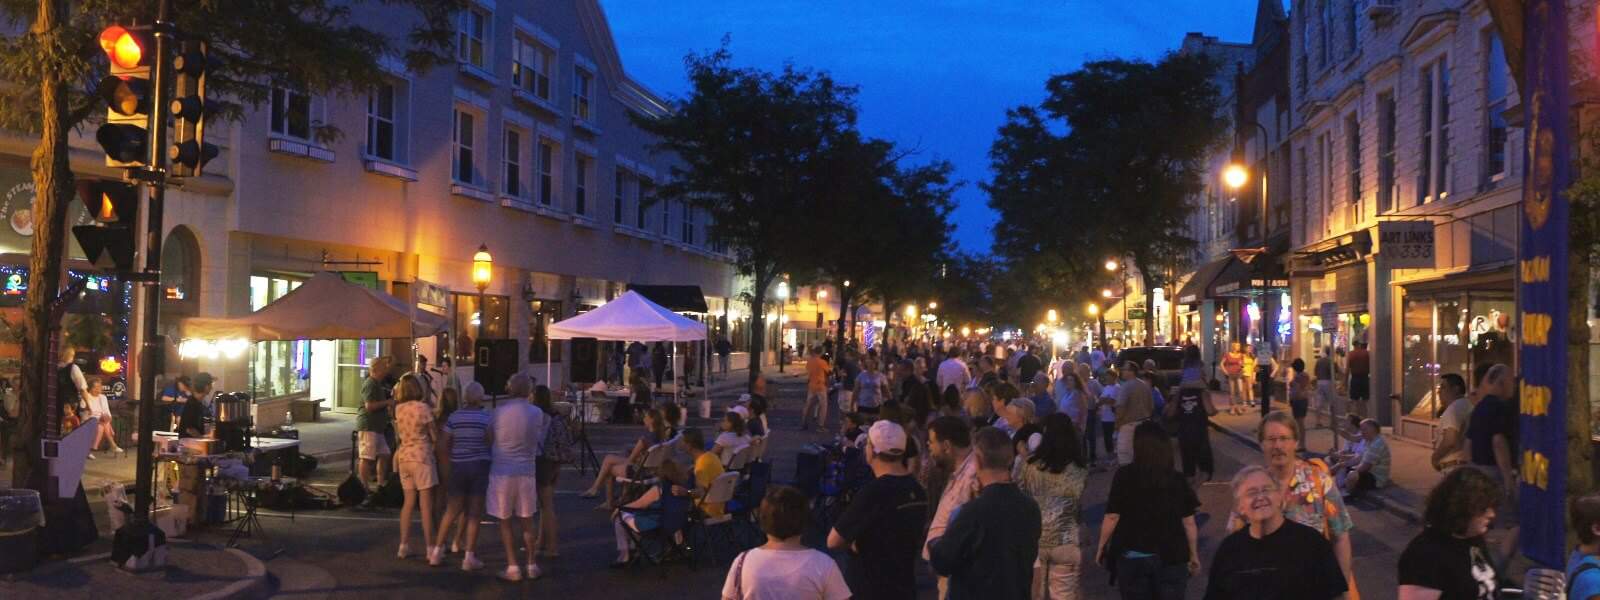 Picture of lit street in the evening for Friday night live.